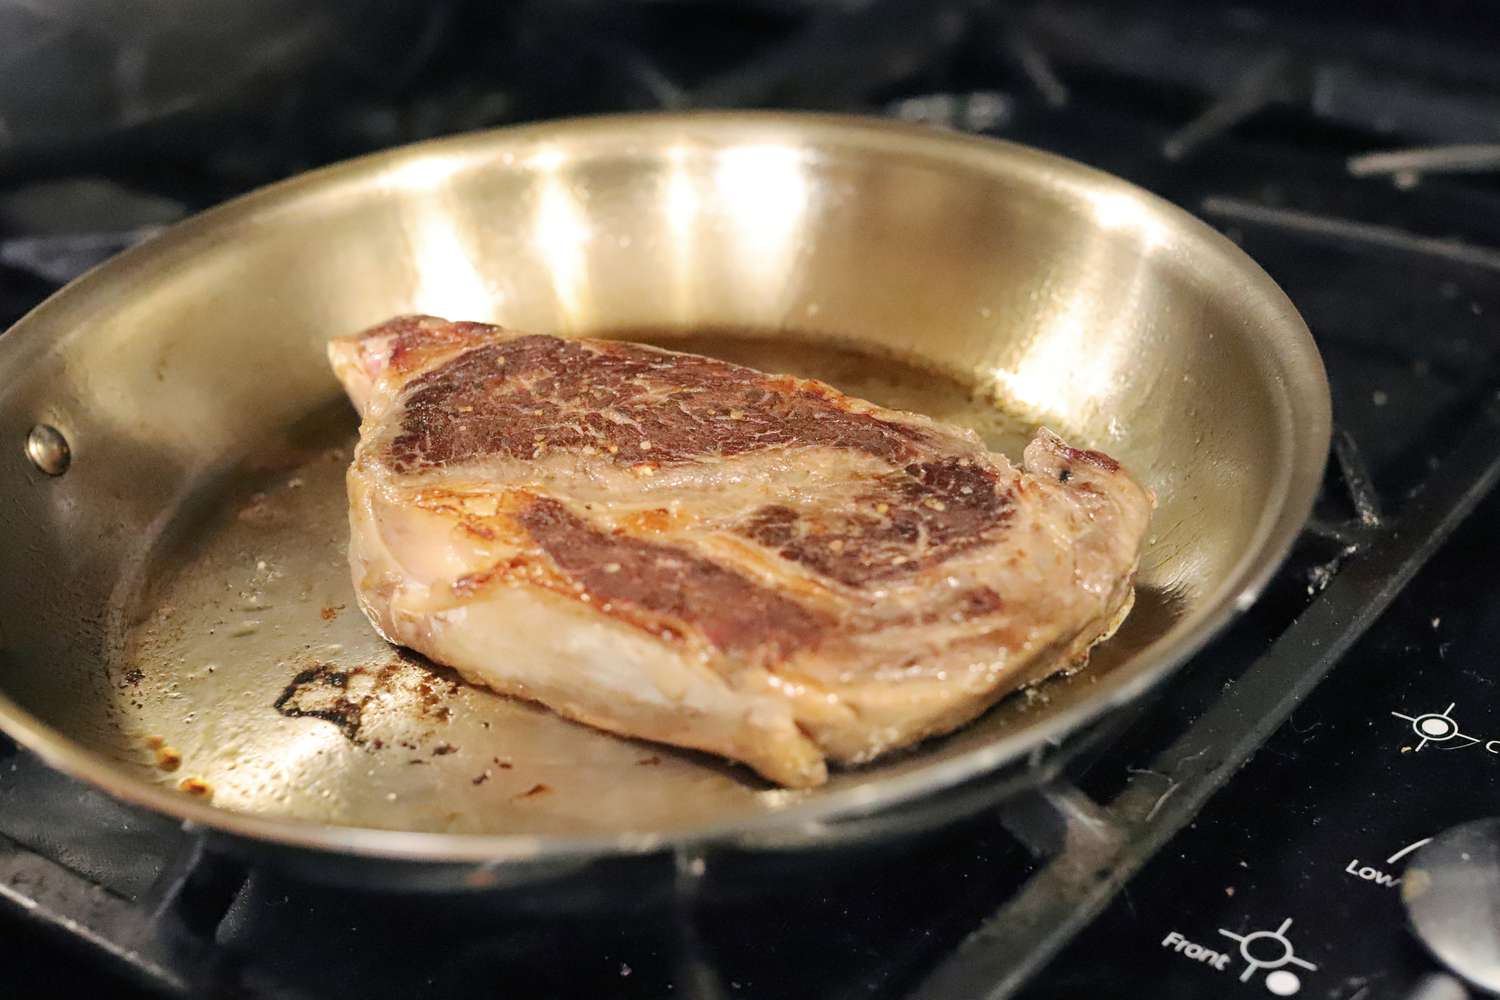 Searing steak in the All-Clad G5 frying pan on a gas stove